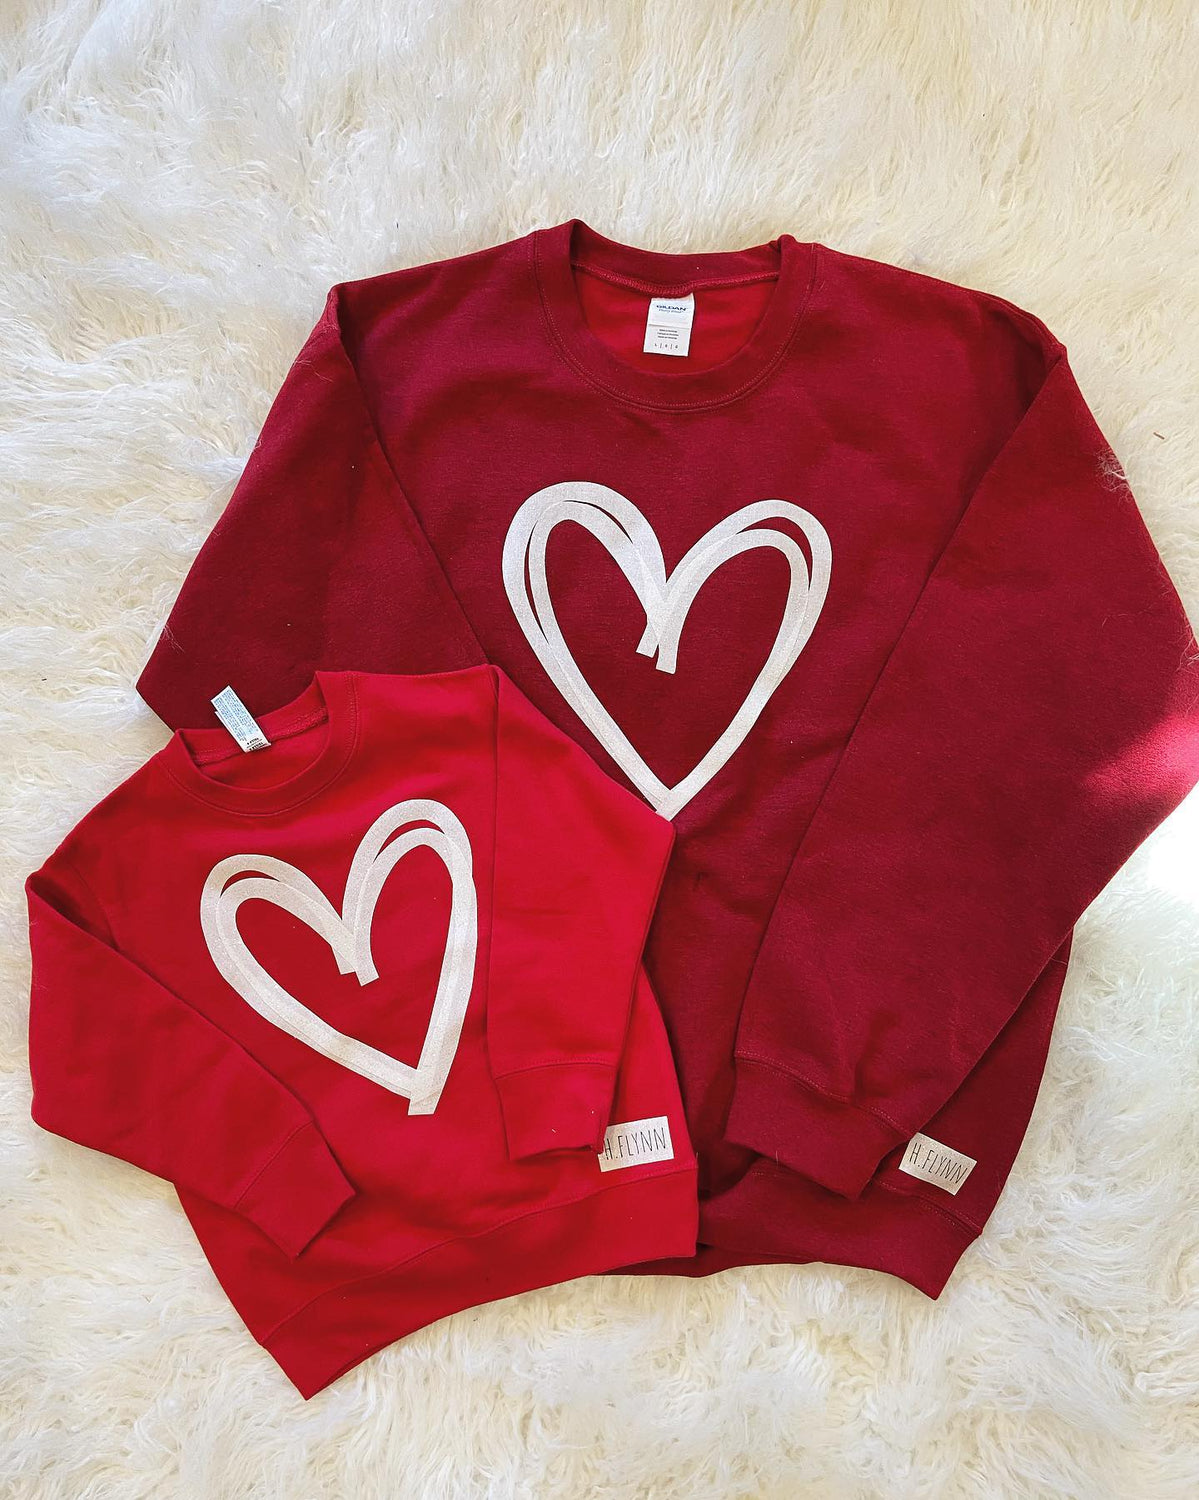 WHITE SPARKLE HEART RED CREW - TODDLER, YOUTH, ADULT